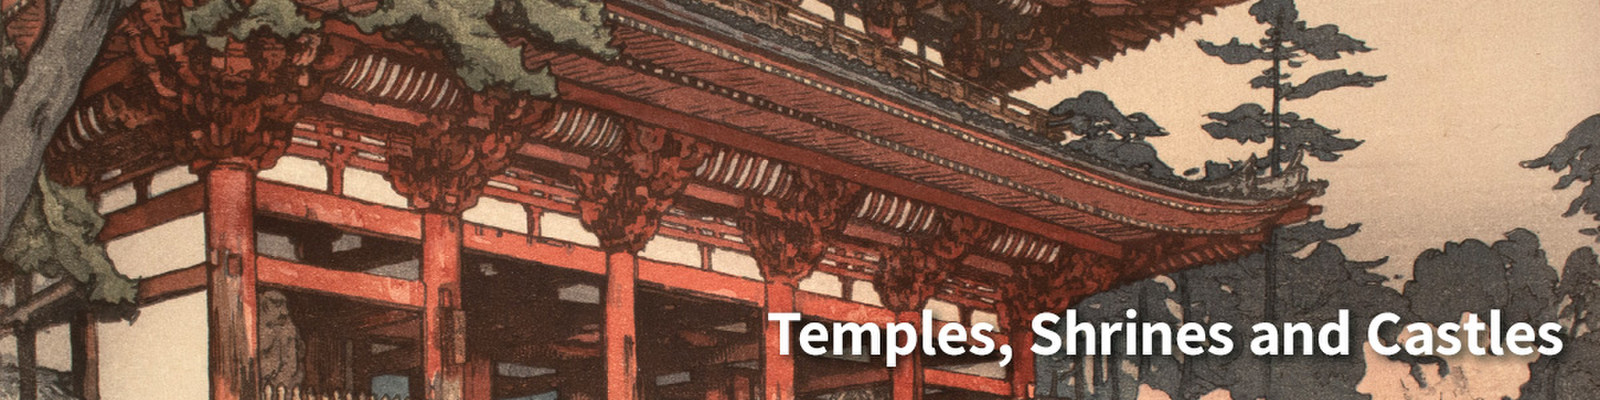 Temples, Shrines and Castles